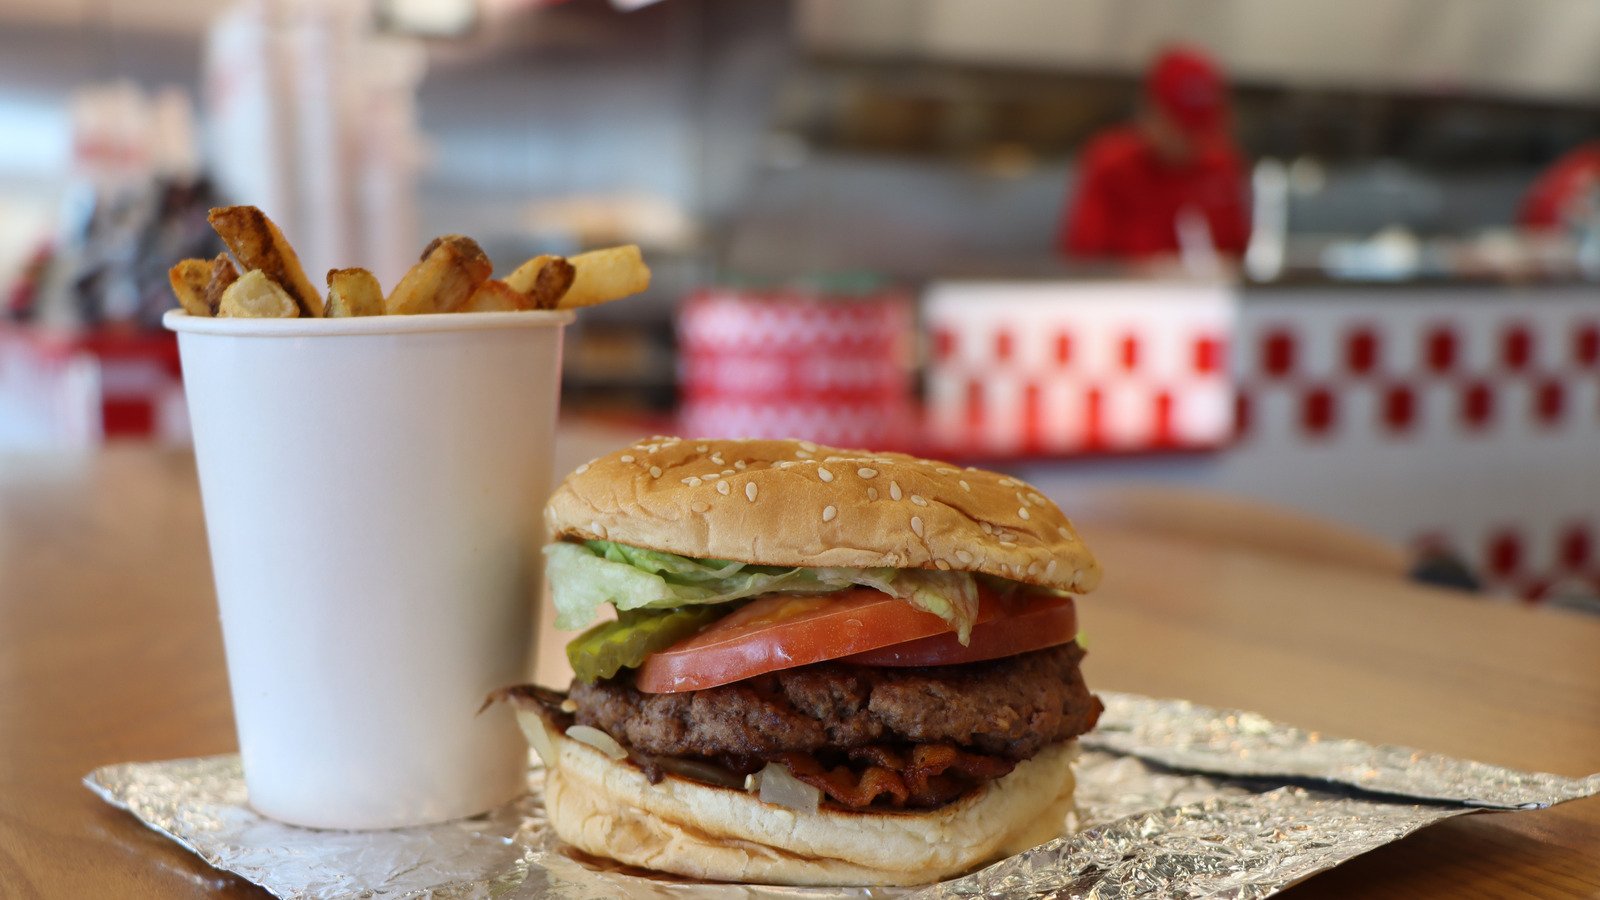 TikTok Is Impressed By This Employee Five Guys French Fry Reveal